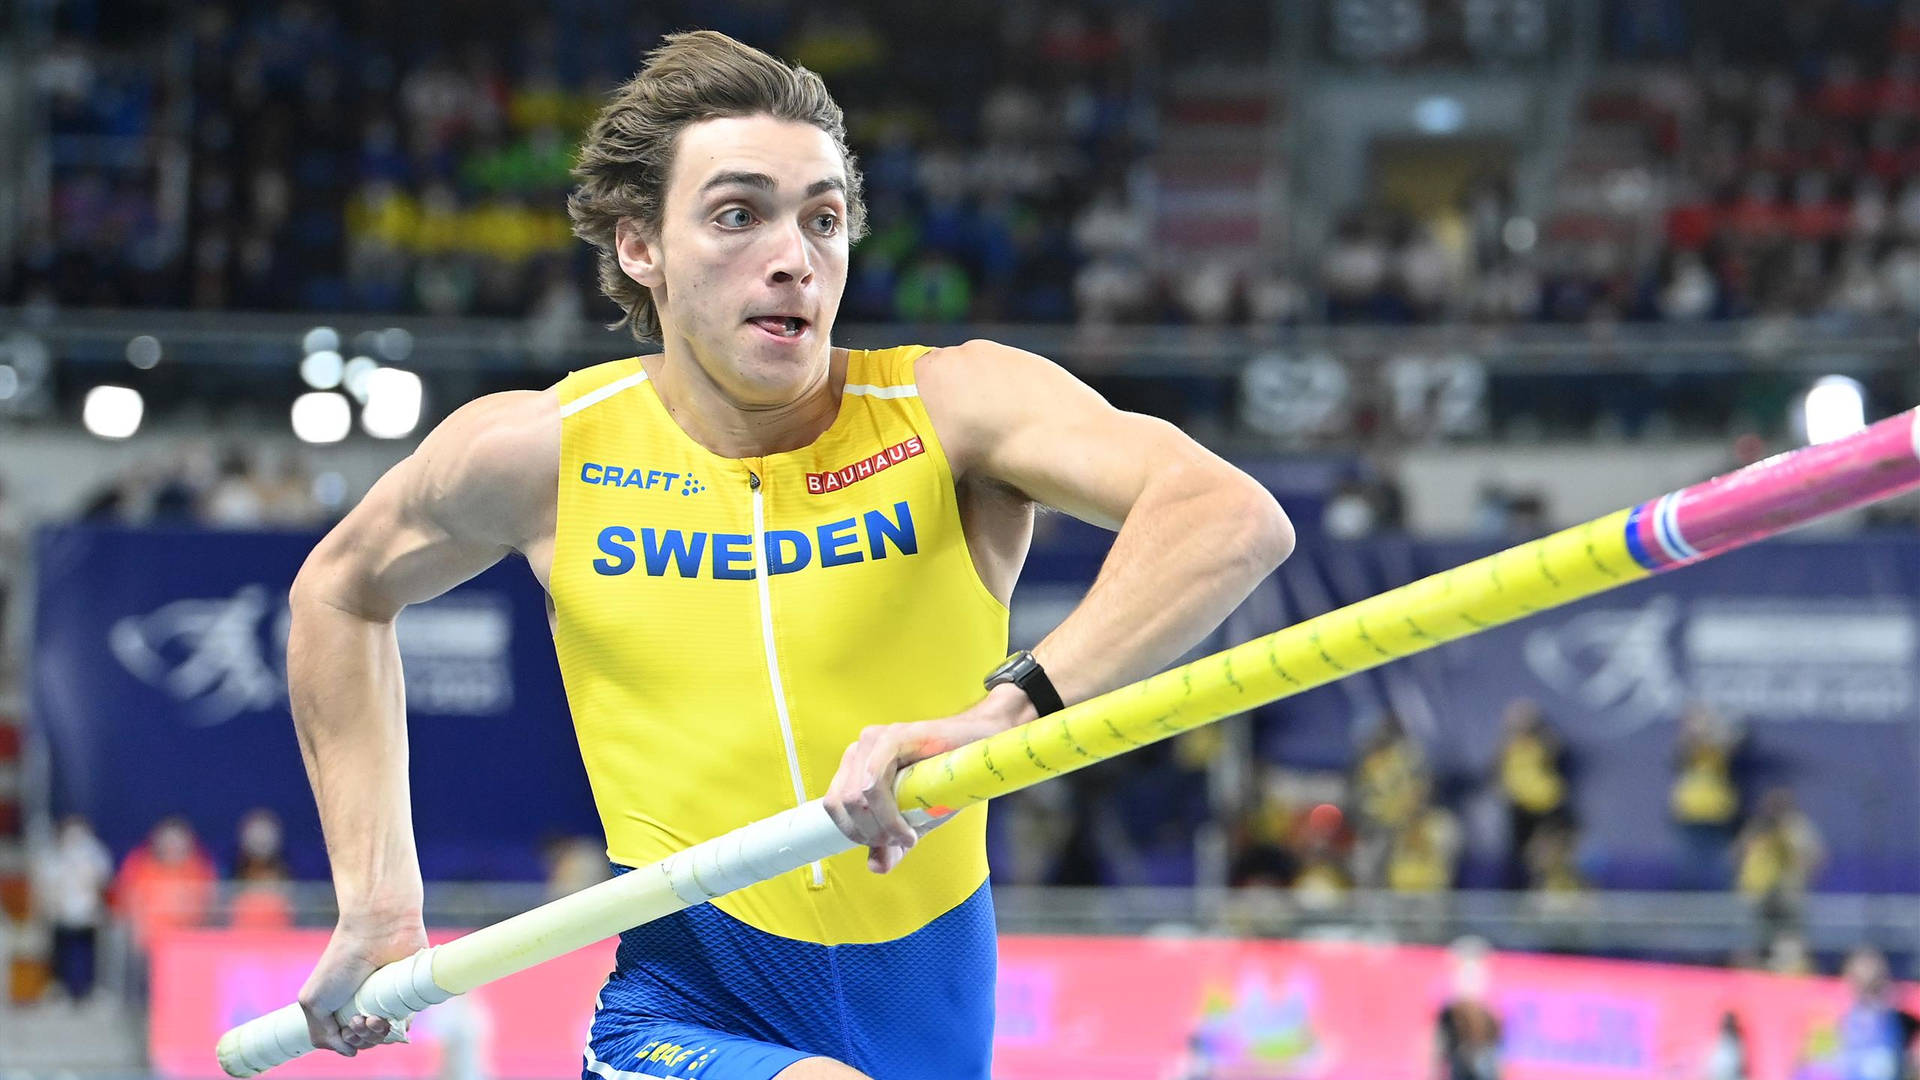 Armand Duplantis In Action In A Pole Vault Game Background